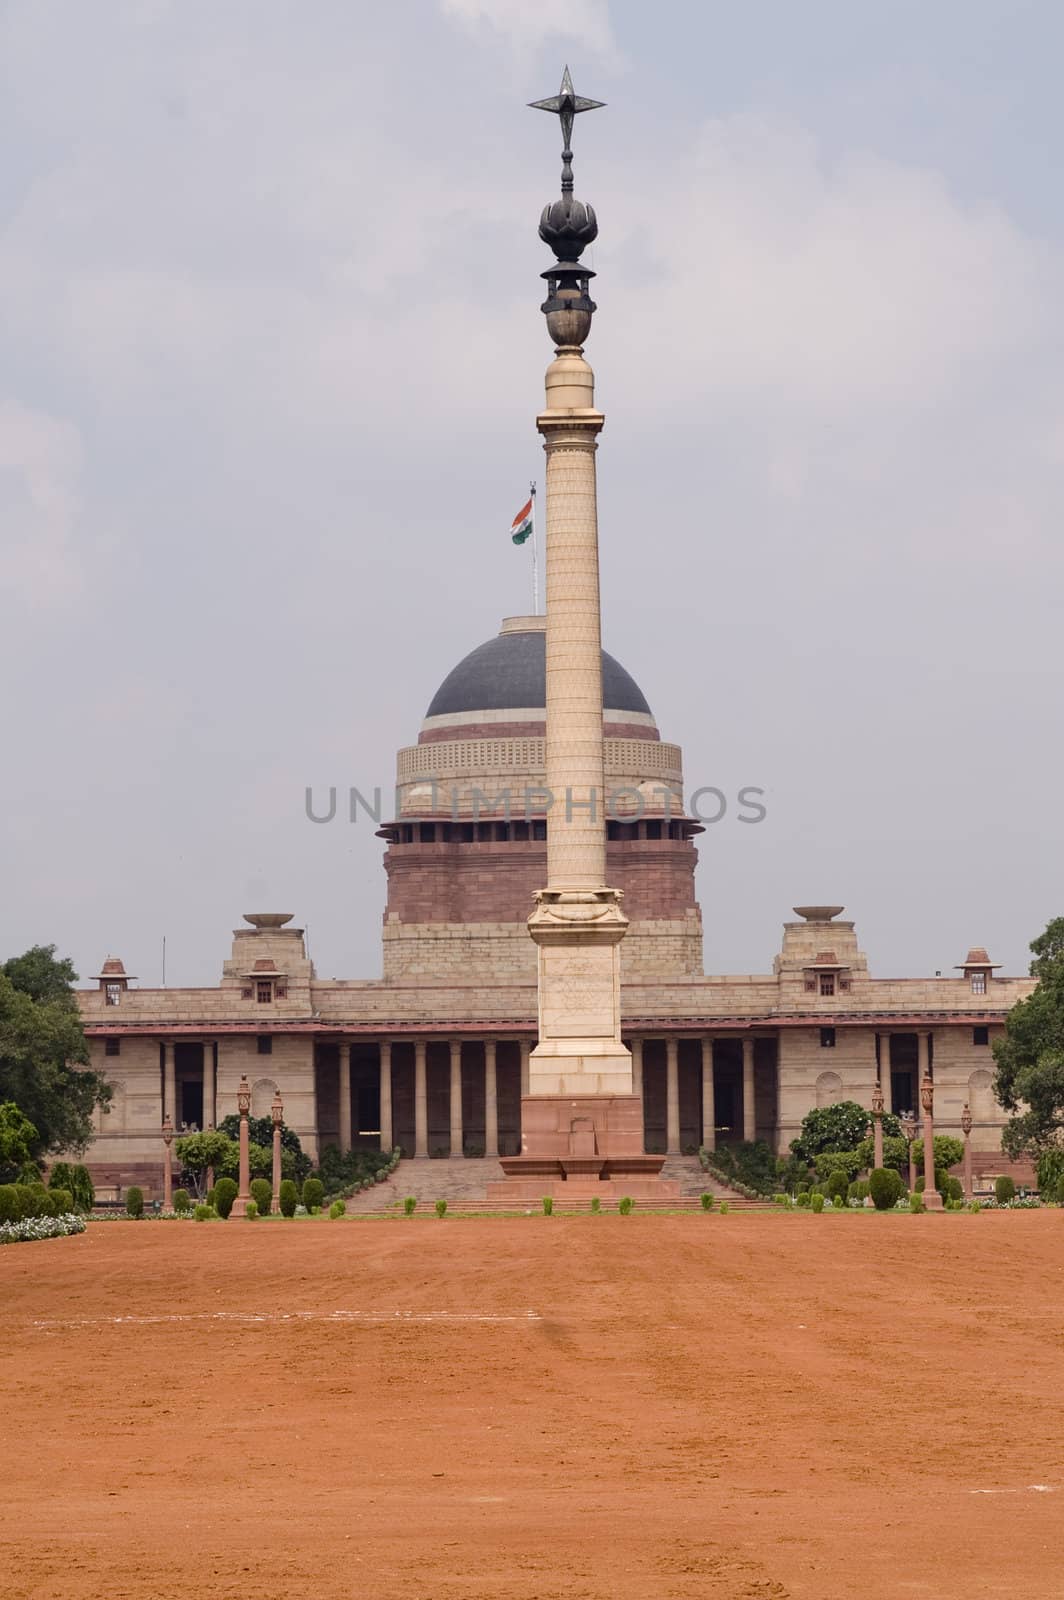 Rashtrapati Bhavan (former Viceroy's House when Indian was under British rule). Large imperial building in New Delhi.